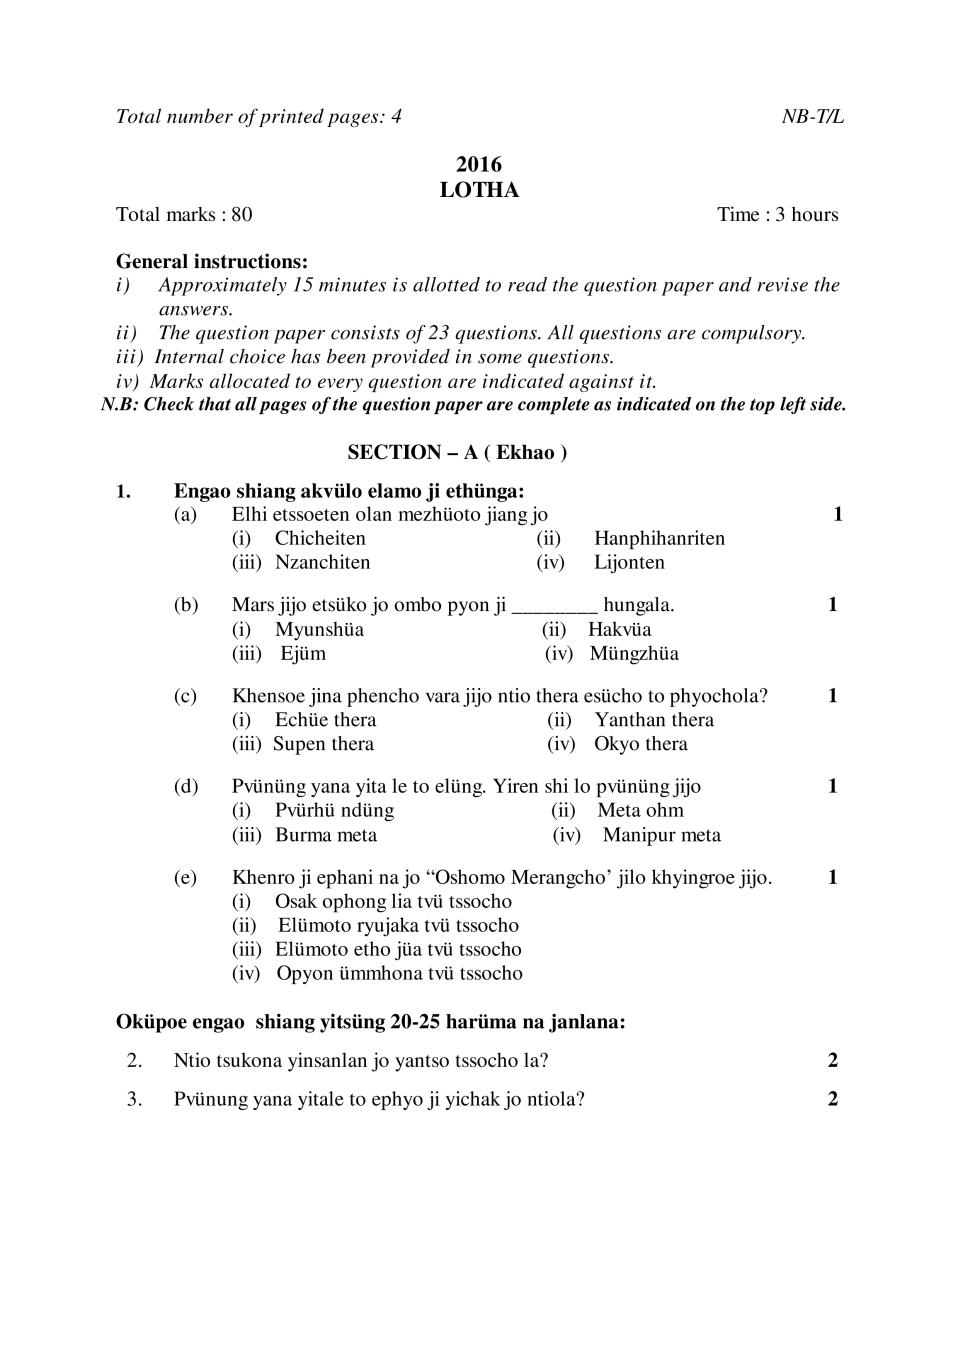 NBSE Class 10 Question Paper 2016 for Lotha - Page 1